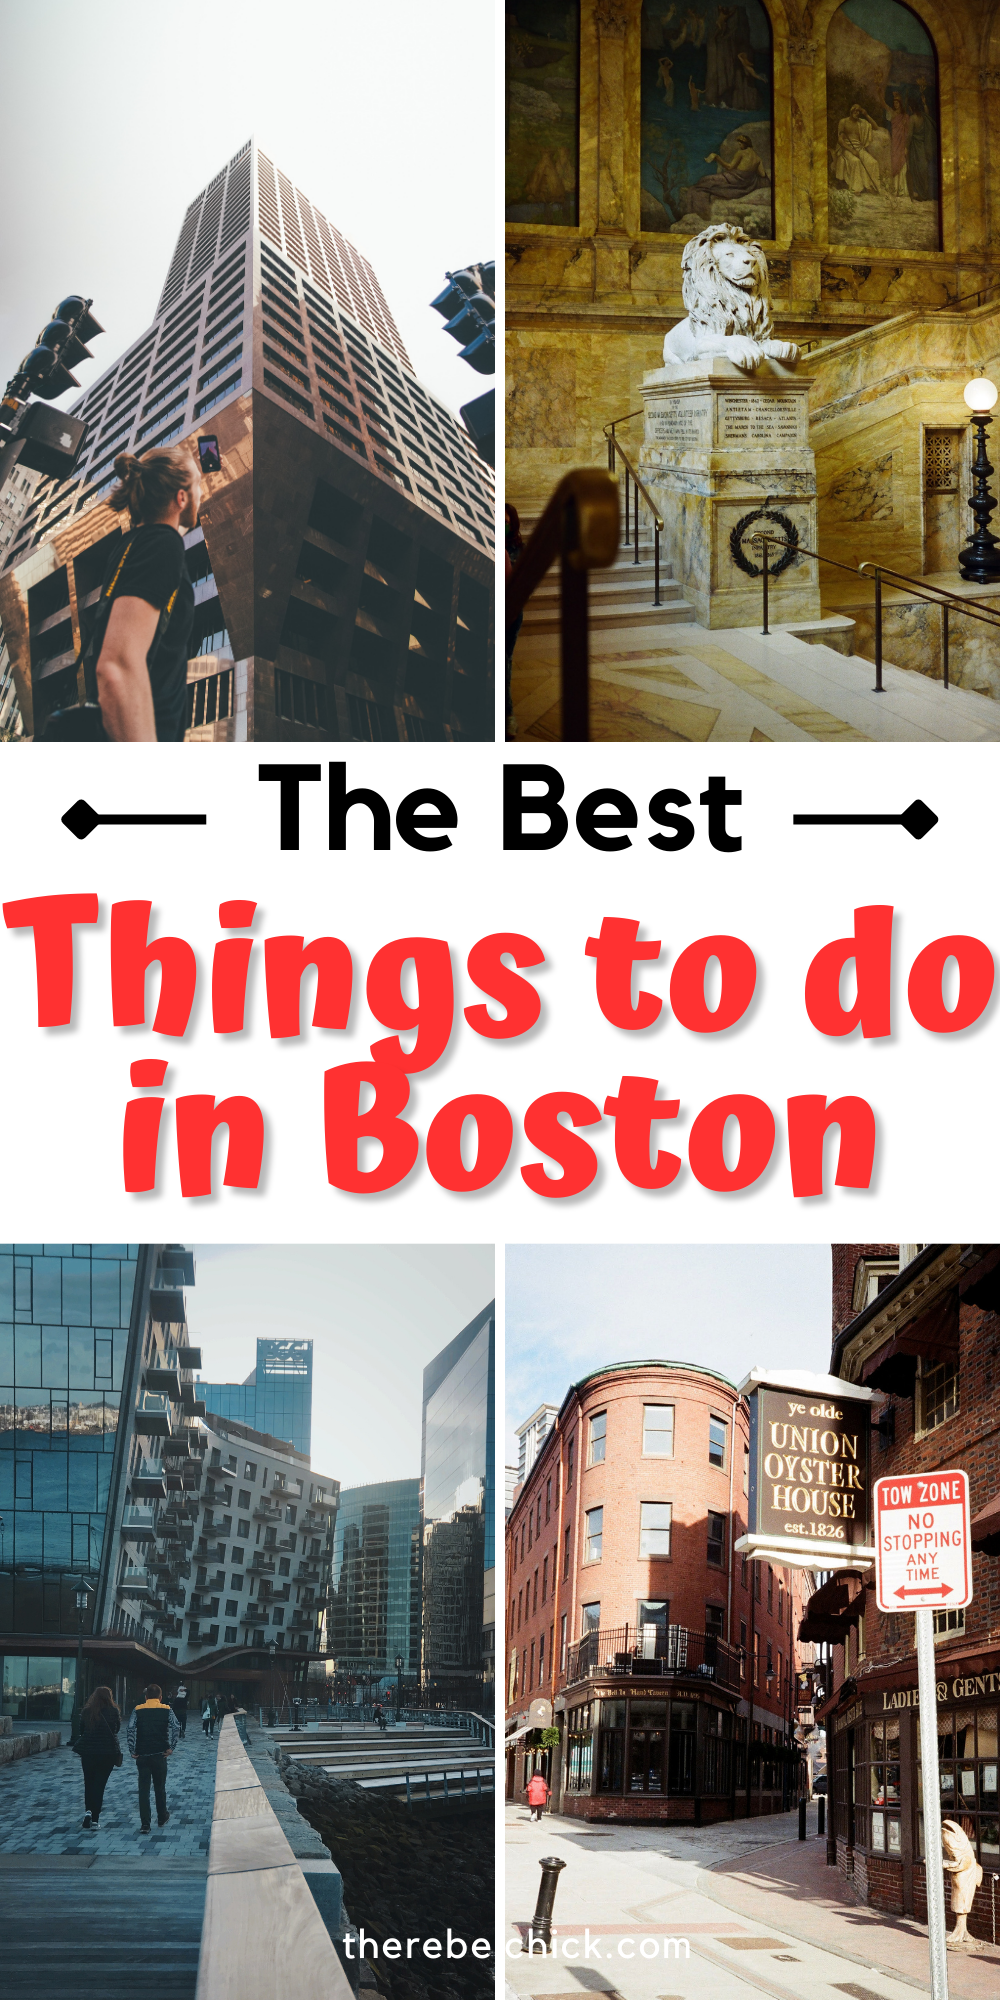 Top Things to Do in Boston